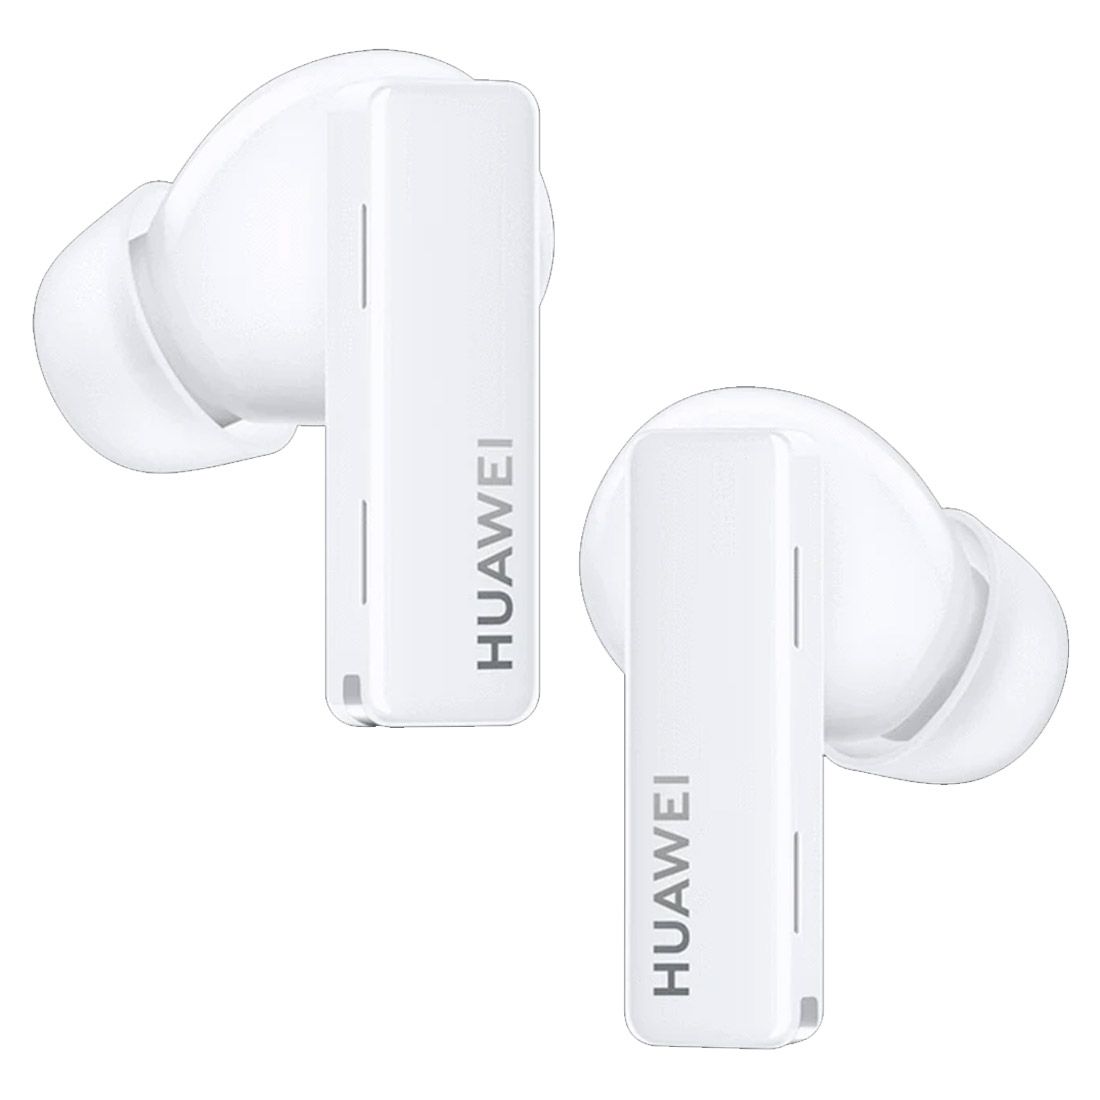 HUAWEI FreeBuds Pro, Active Noise Cancelling Wireless Earbuds - White Huawei